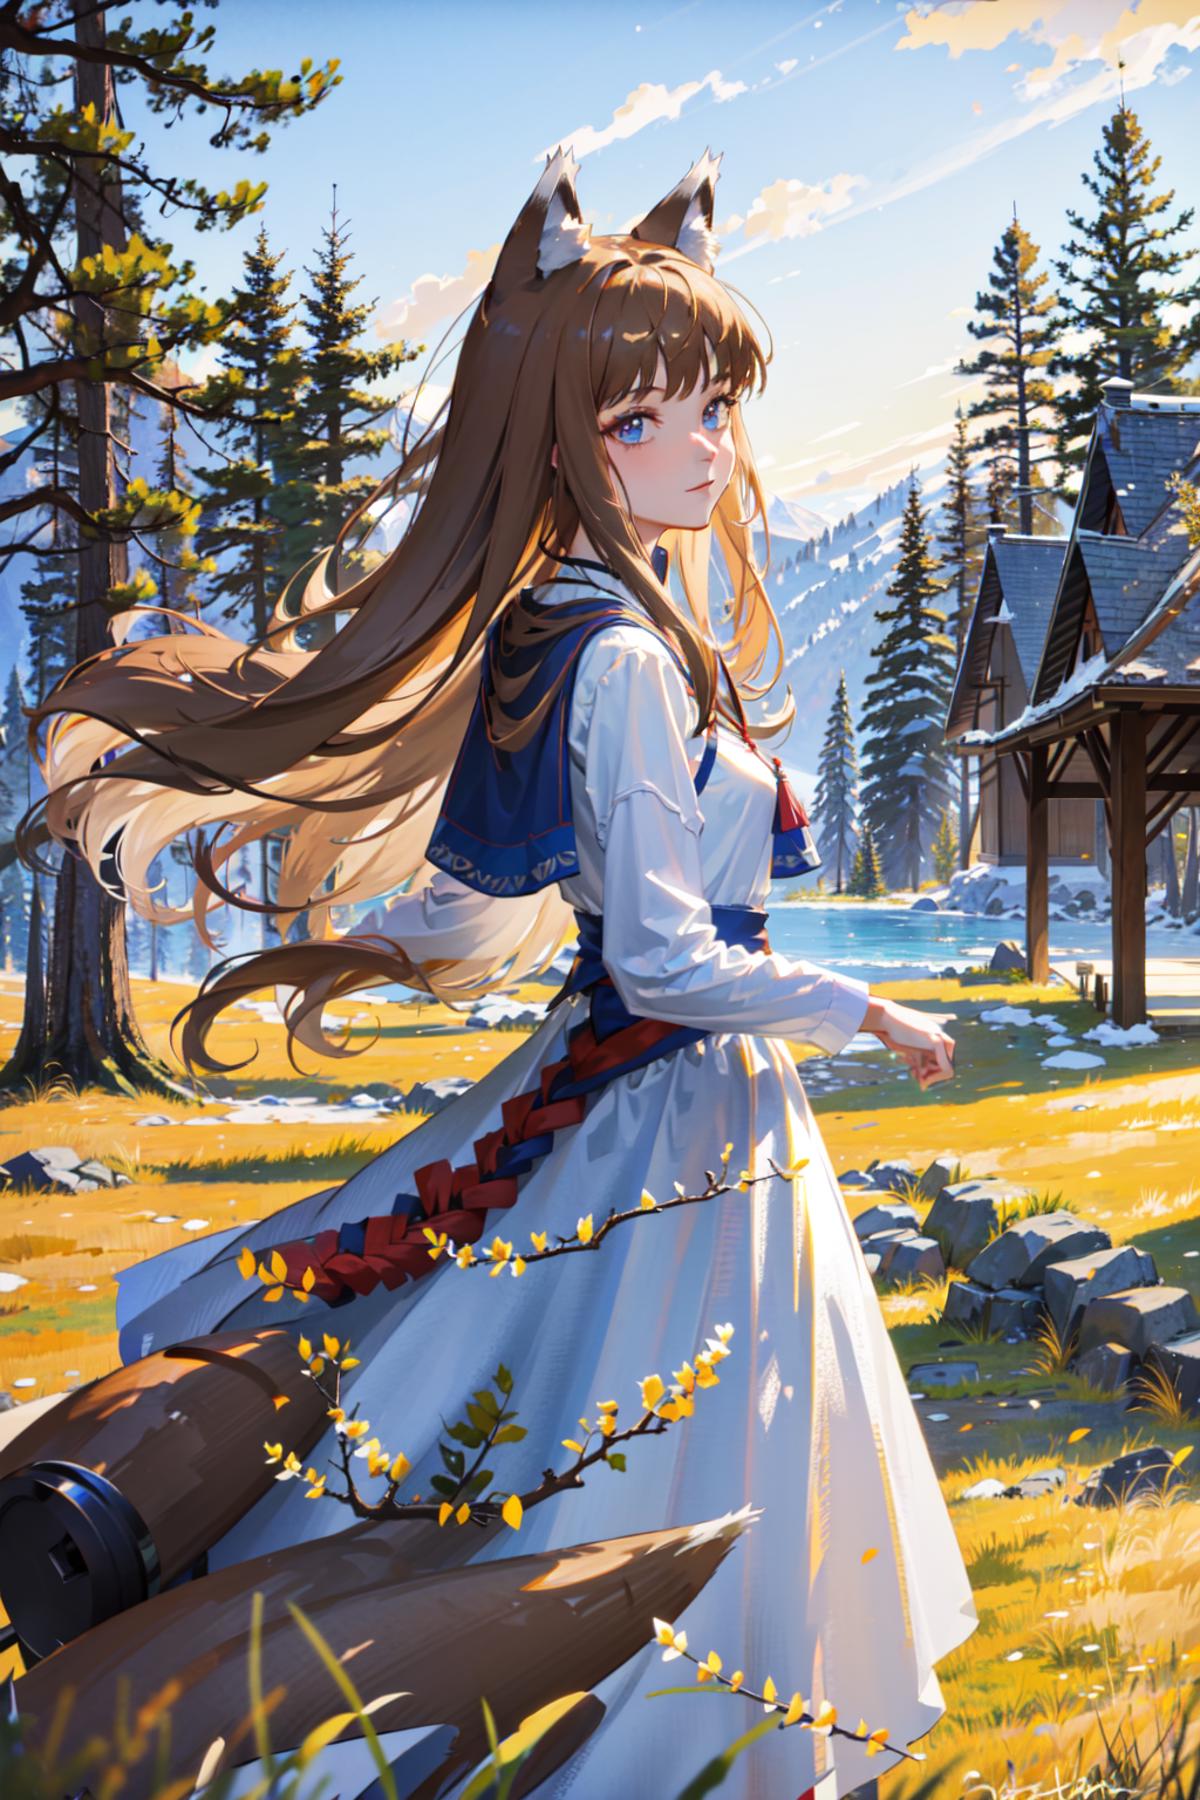 Holo / Spice And Wolf image by cumetani